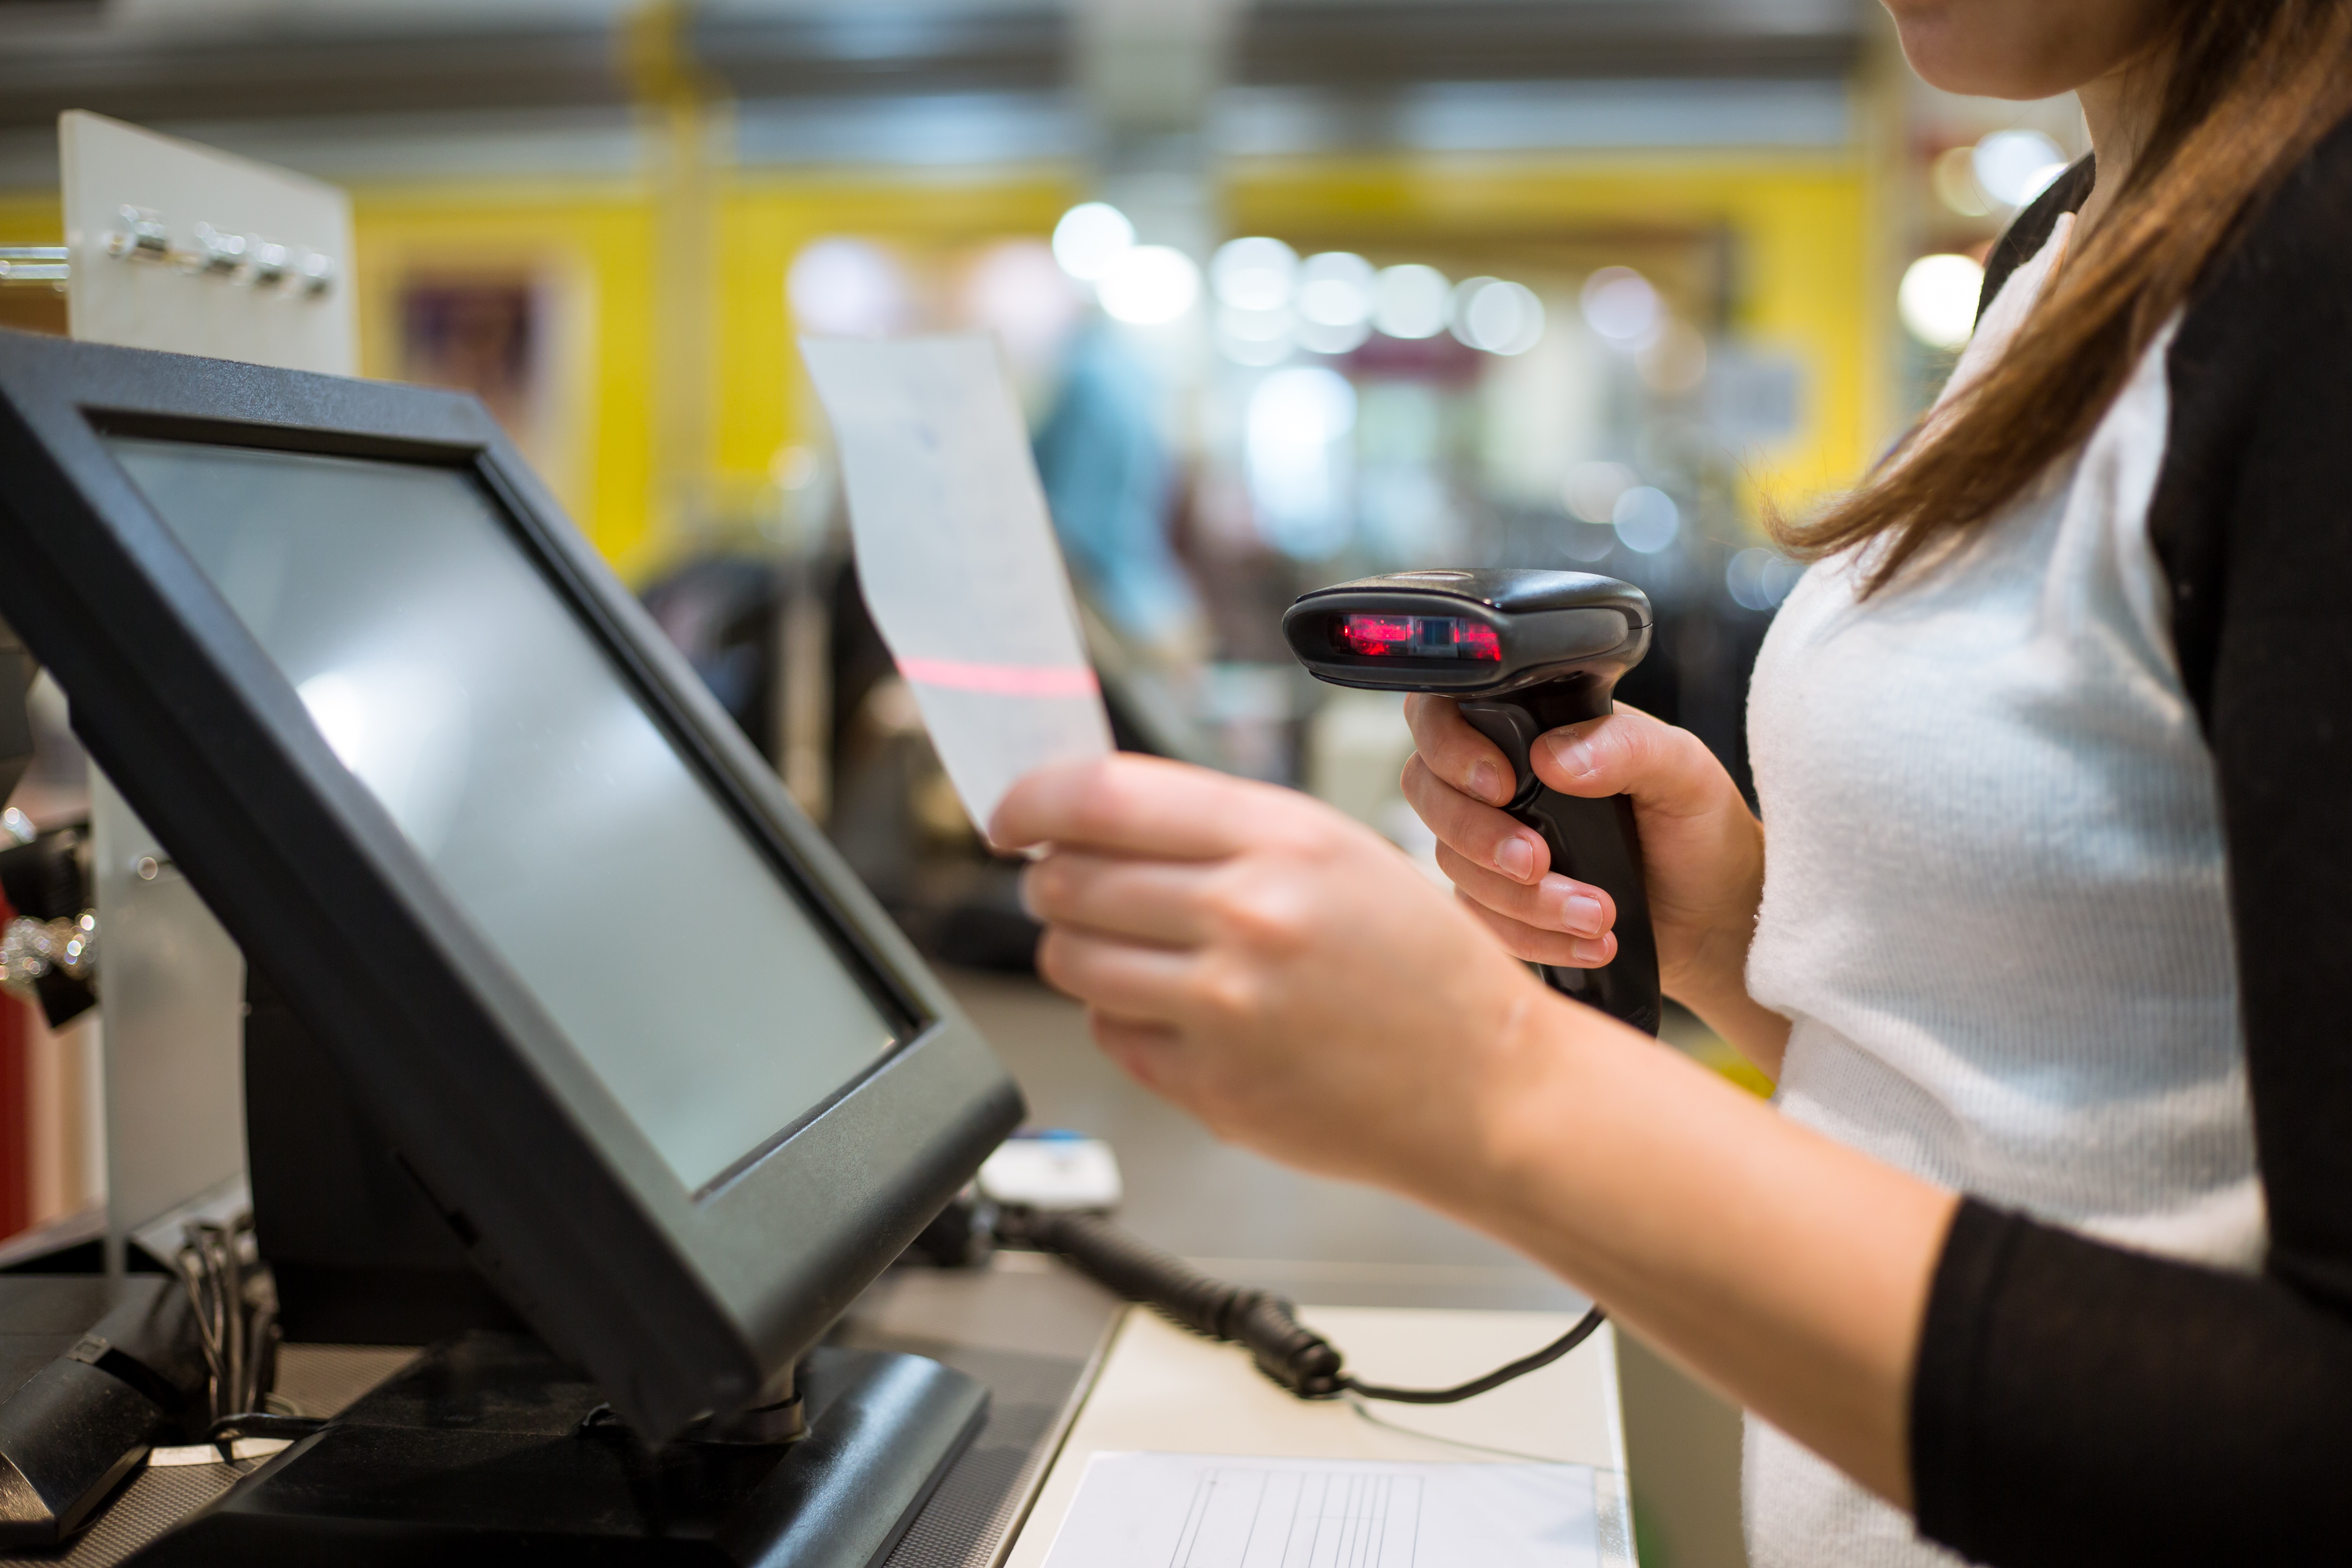 A person holding a receipt and using a scanner